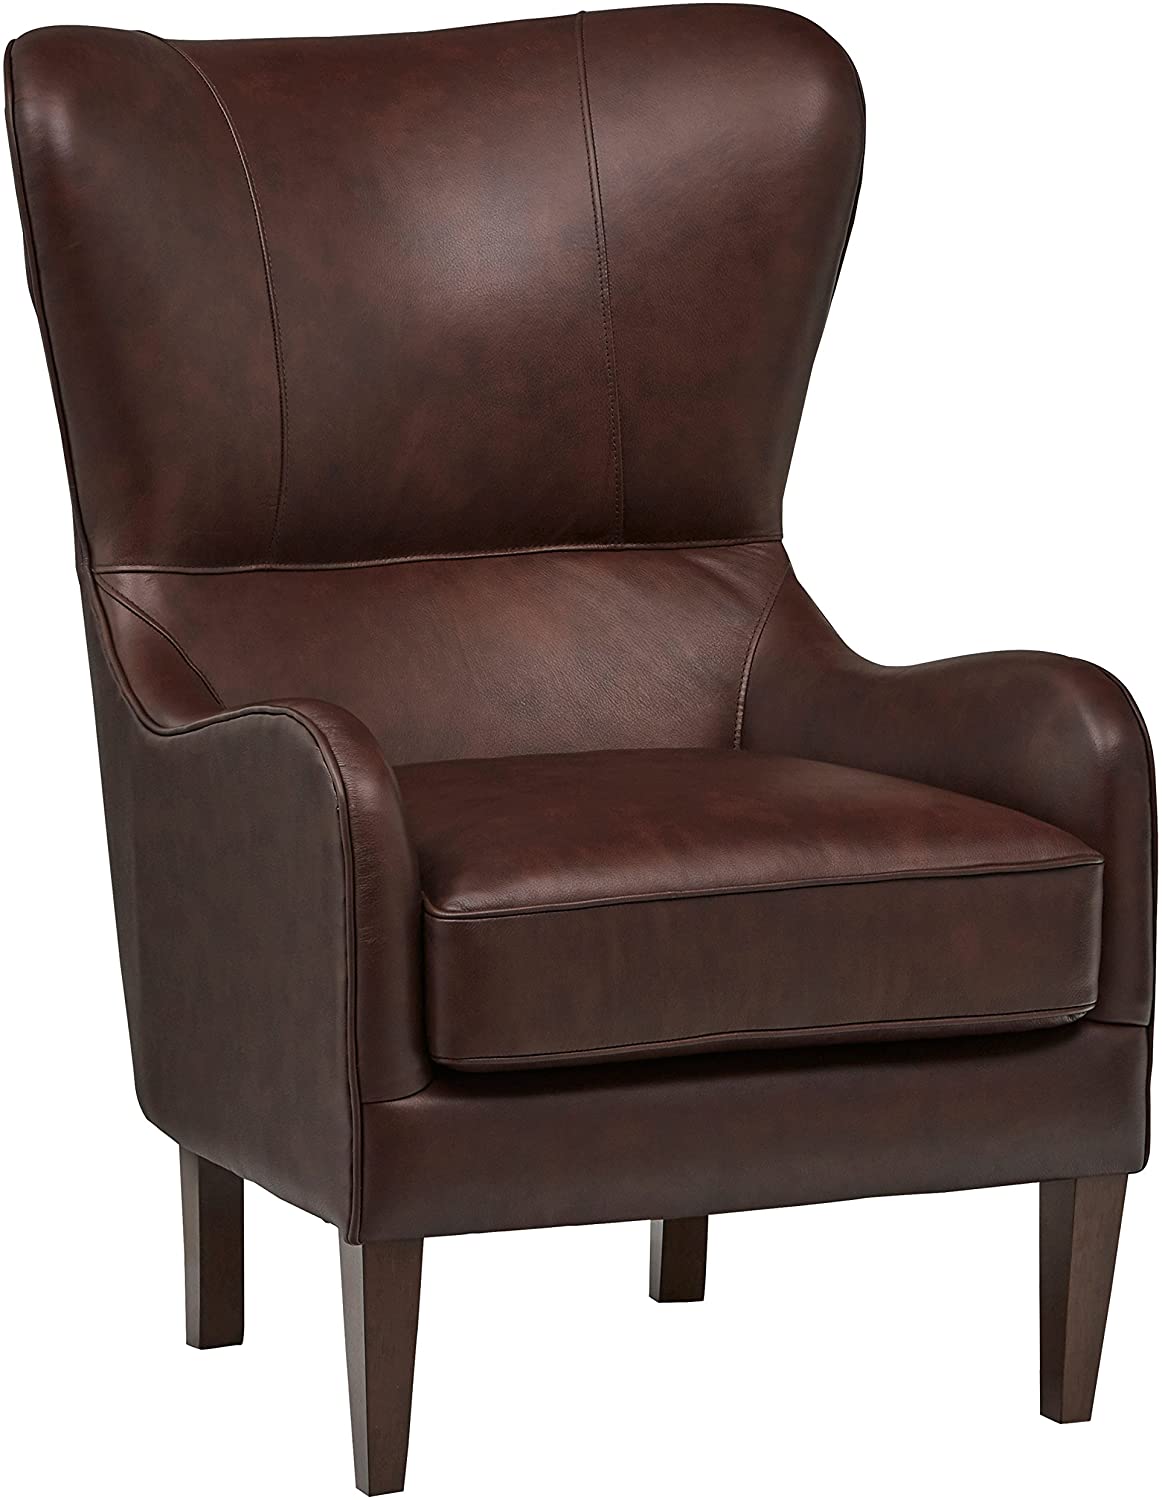 Stone & Beam Mid-Century Leather Wingback Chair